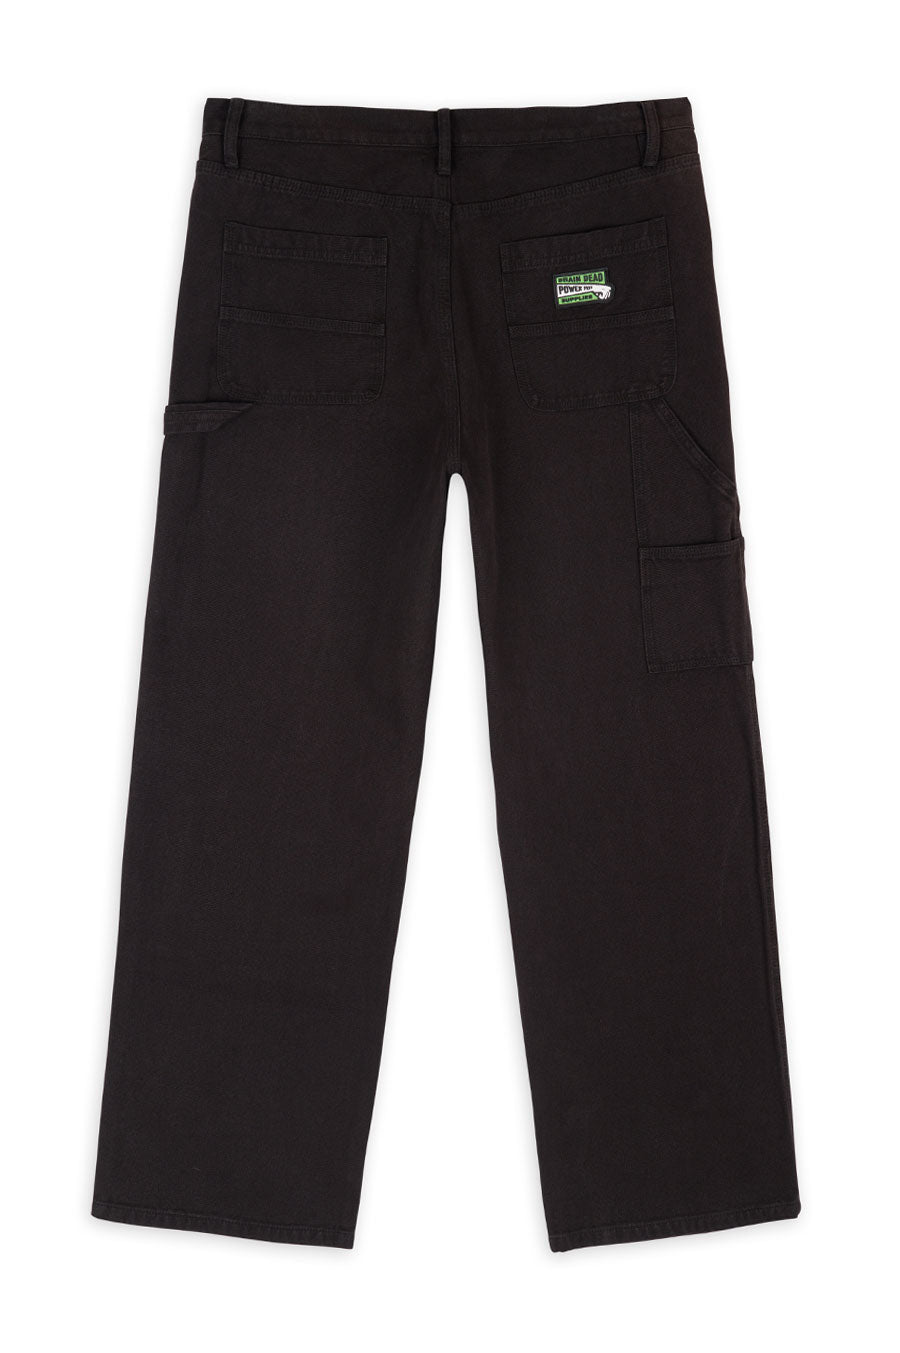 BRAIN DEAD CANVAS GARDENING PANT WASHED BLACK